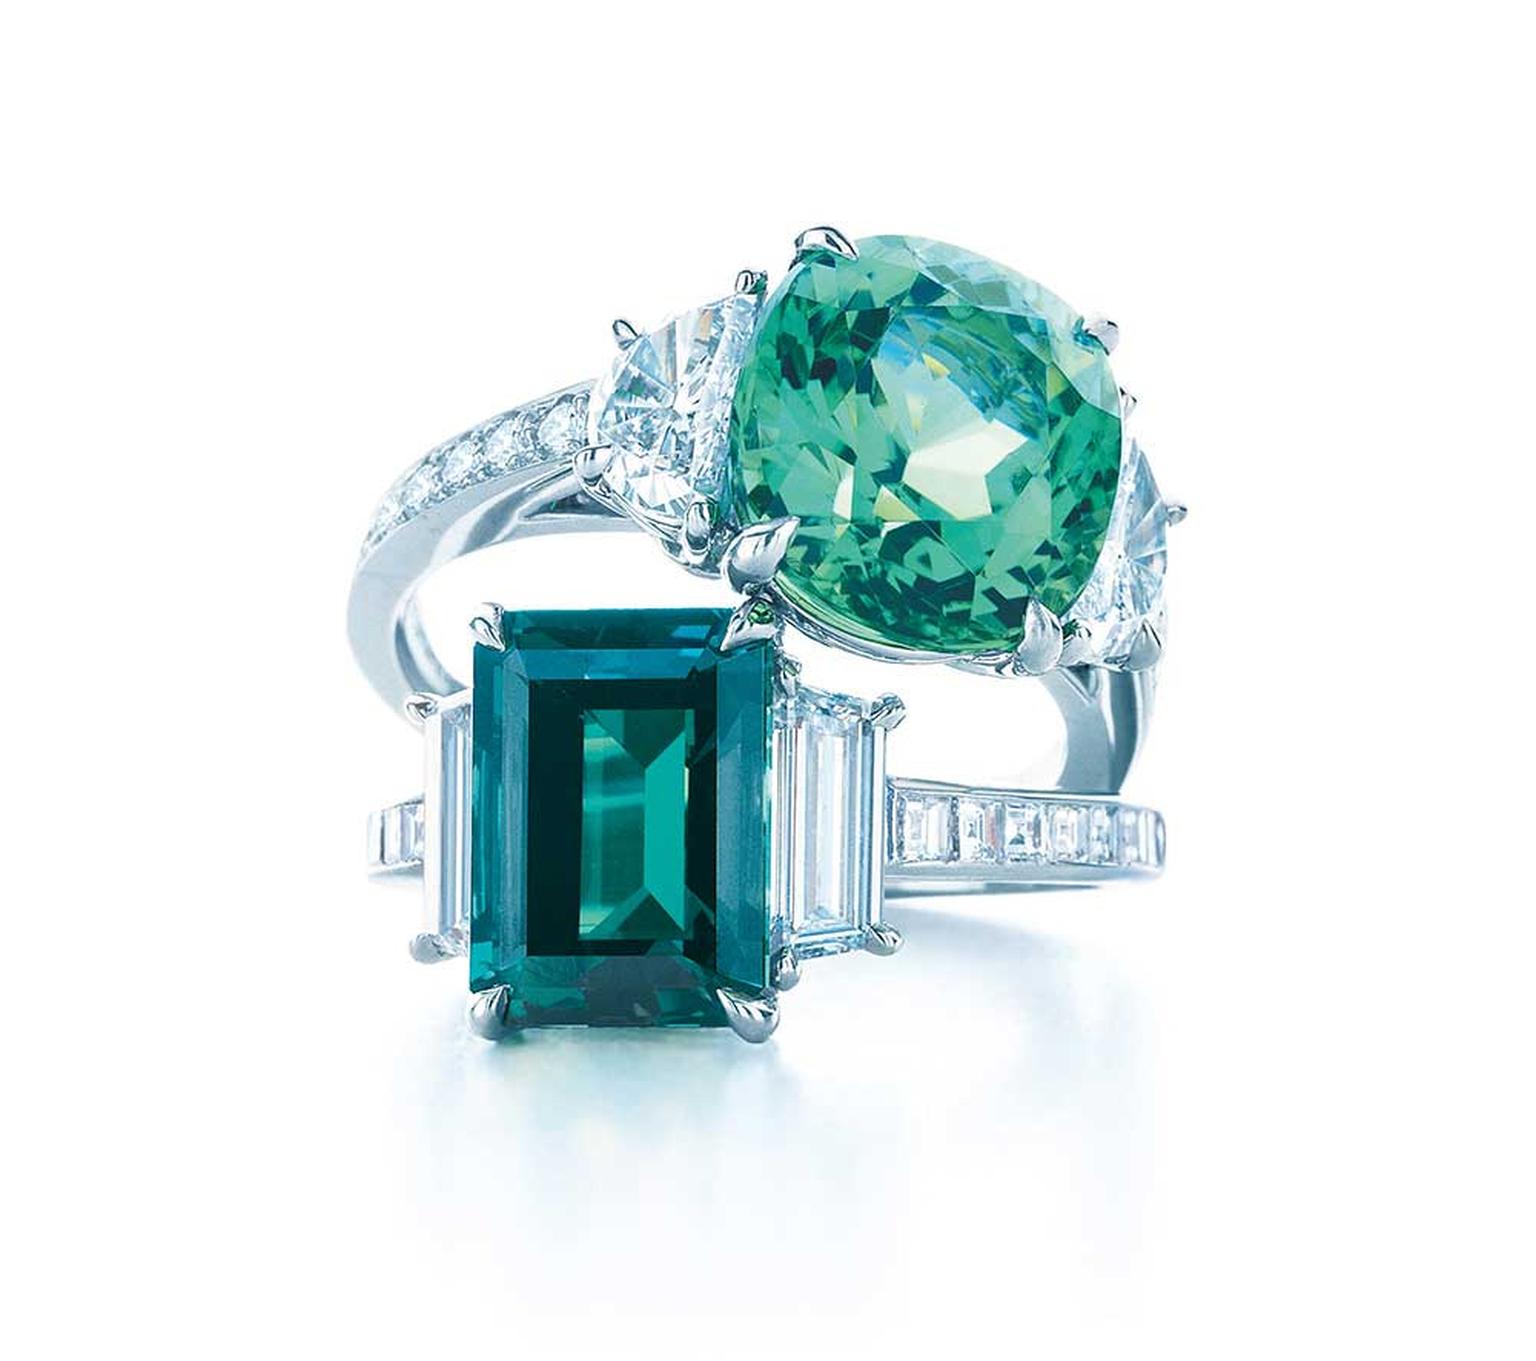 Tiffany & Co diamond and gemstone rings in platinum, set with a cushion-cut green cuprian elbaite tourmaline, above, and emerald-cut alexandrite, below.